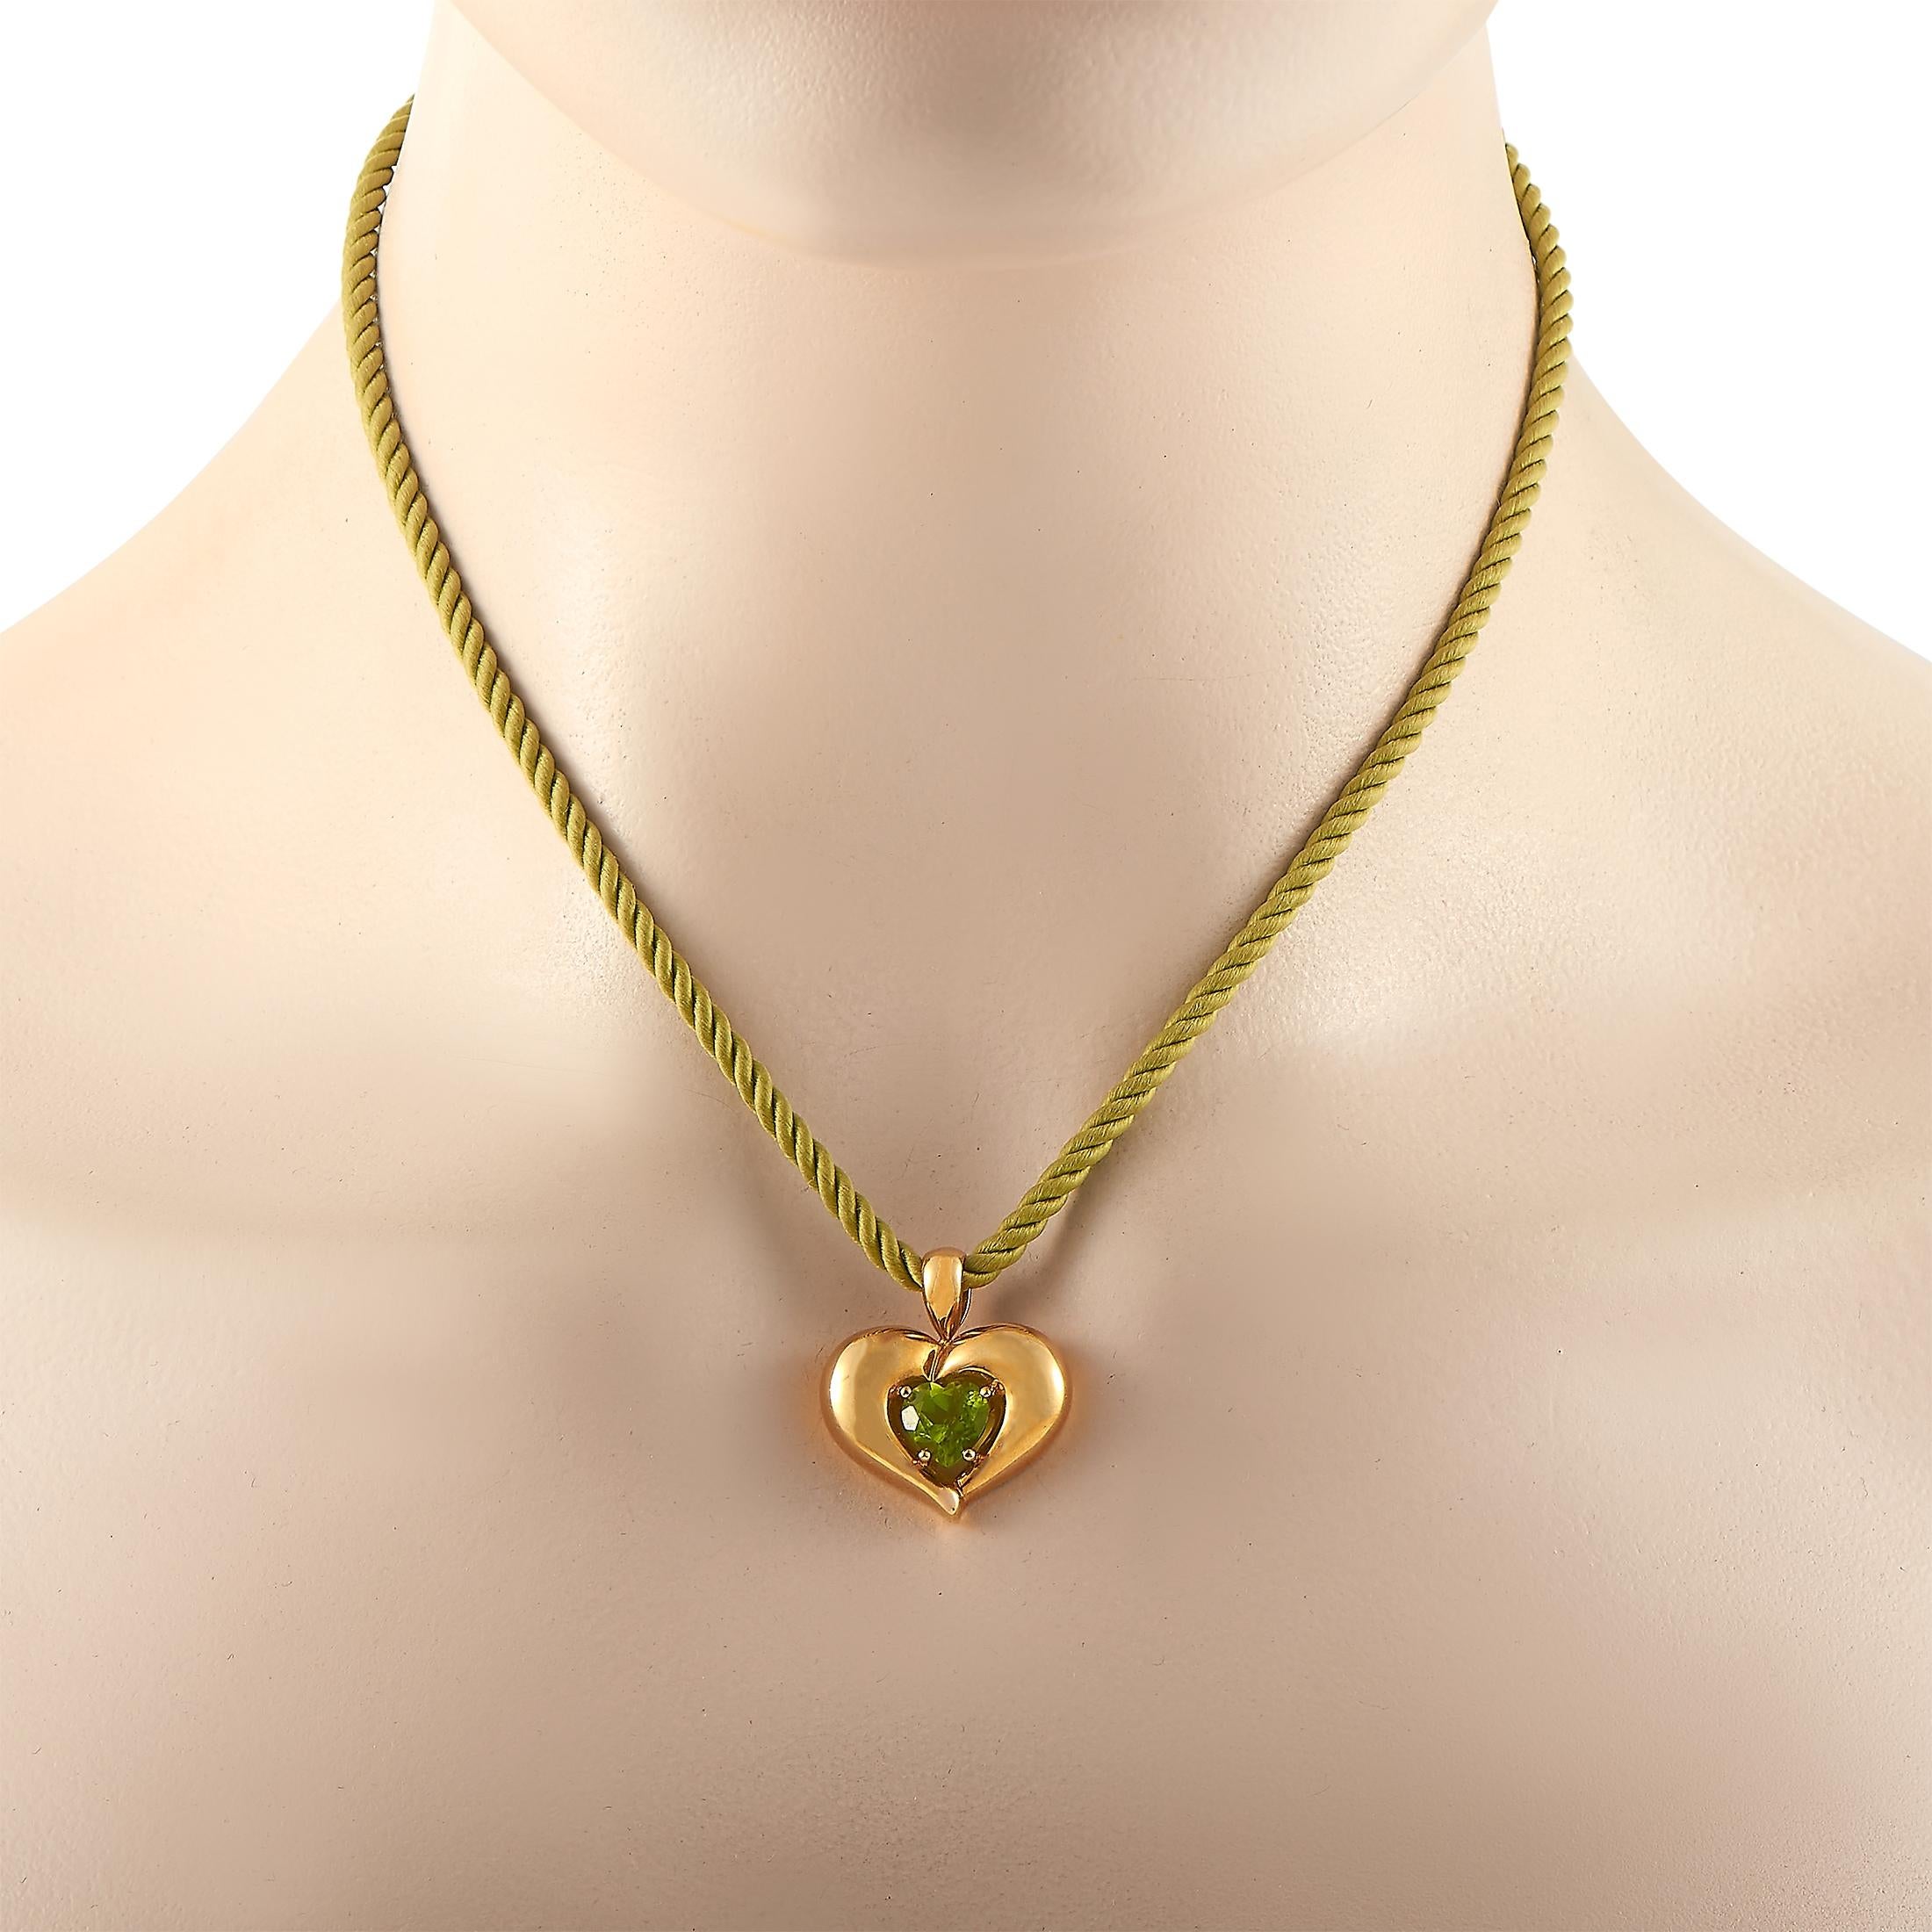 This Van Cleef & Arpels necklace is presented with a green cord onto which a heart pendant is attached, made out of 18K yellow gold and heart-shaped peridot. The cord measures 16” in length and the pendant measures 1” by 1”. The necklace weighs 13.9